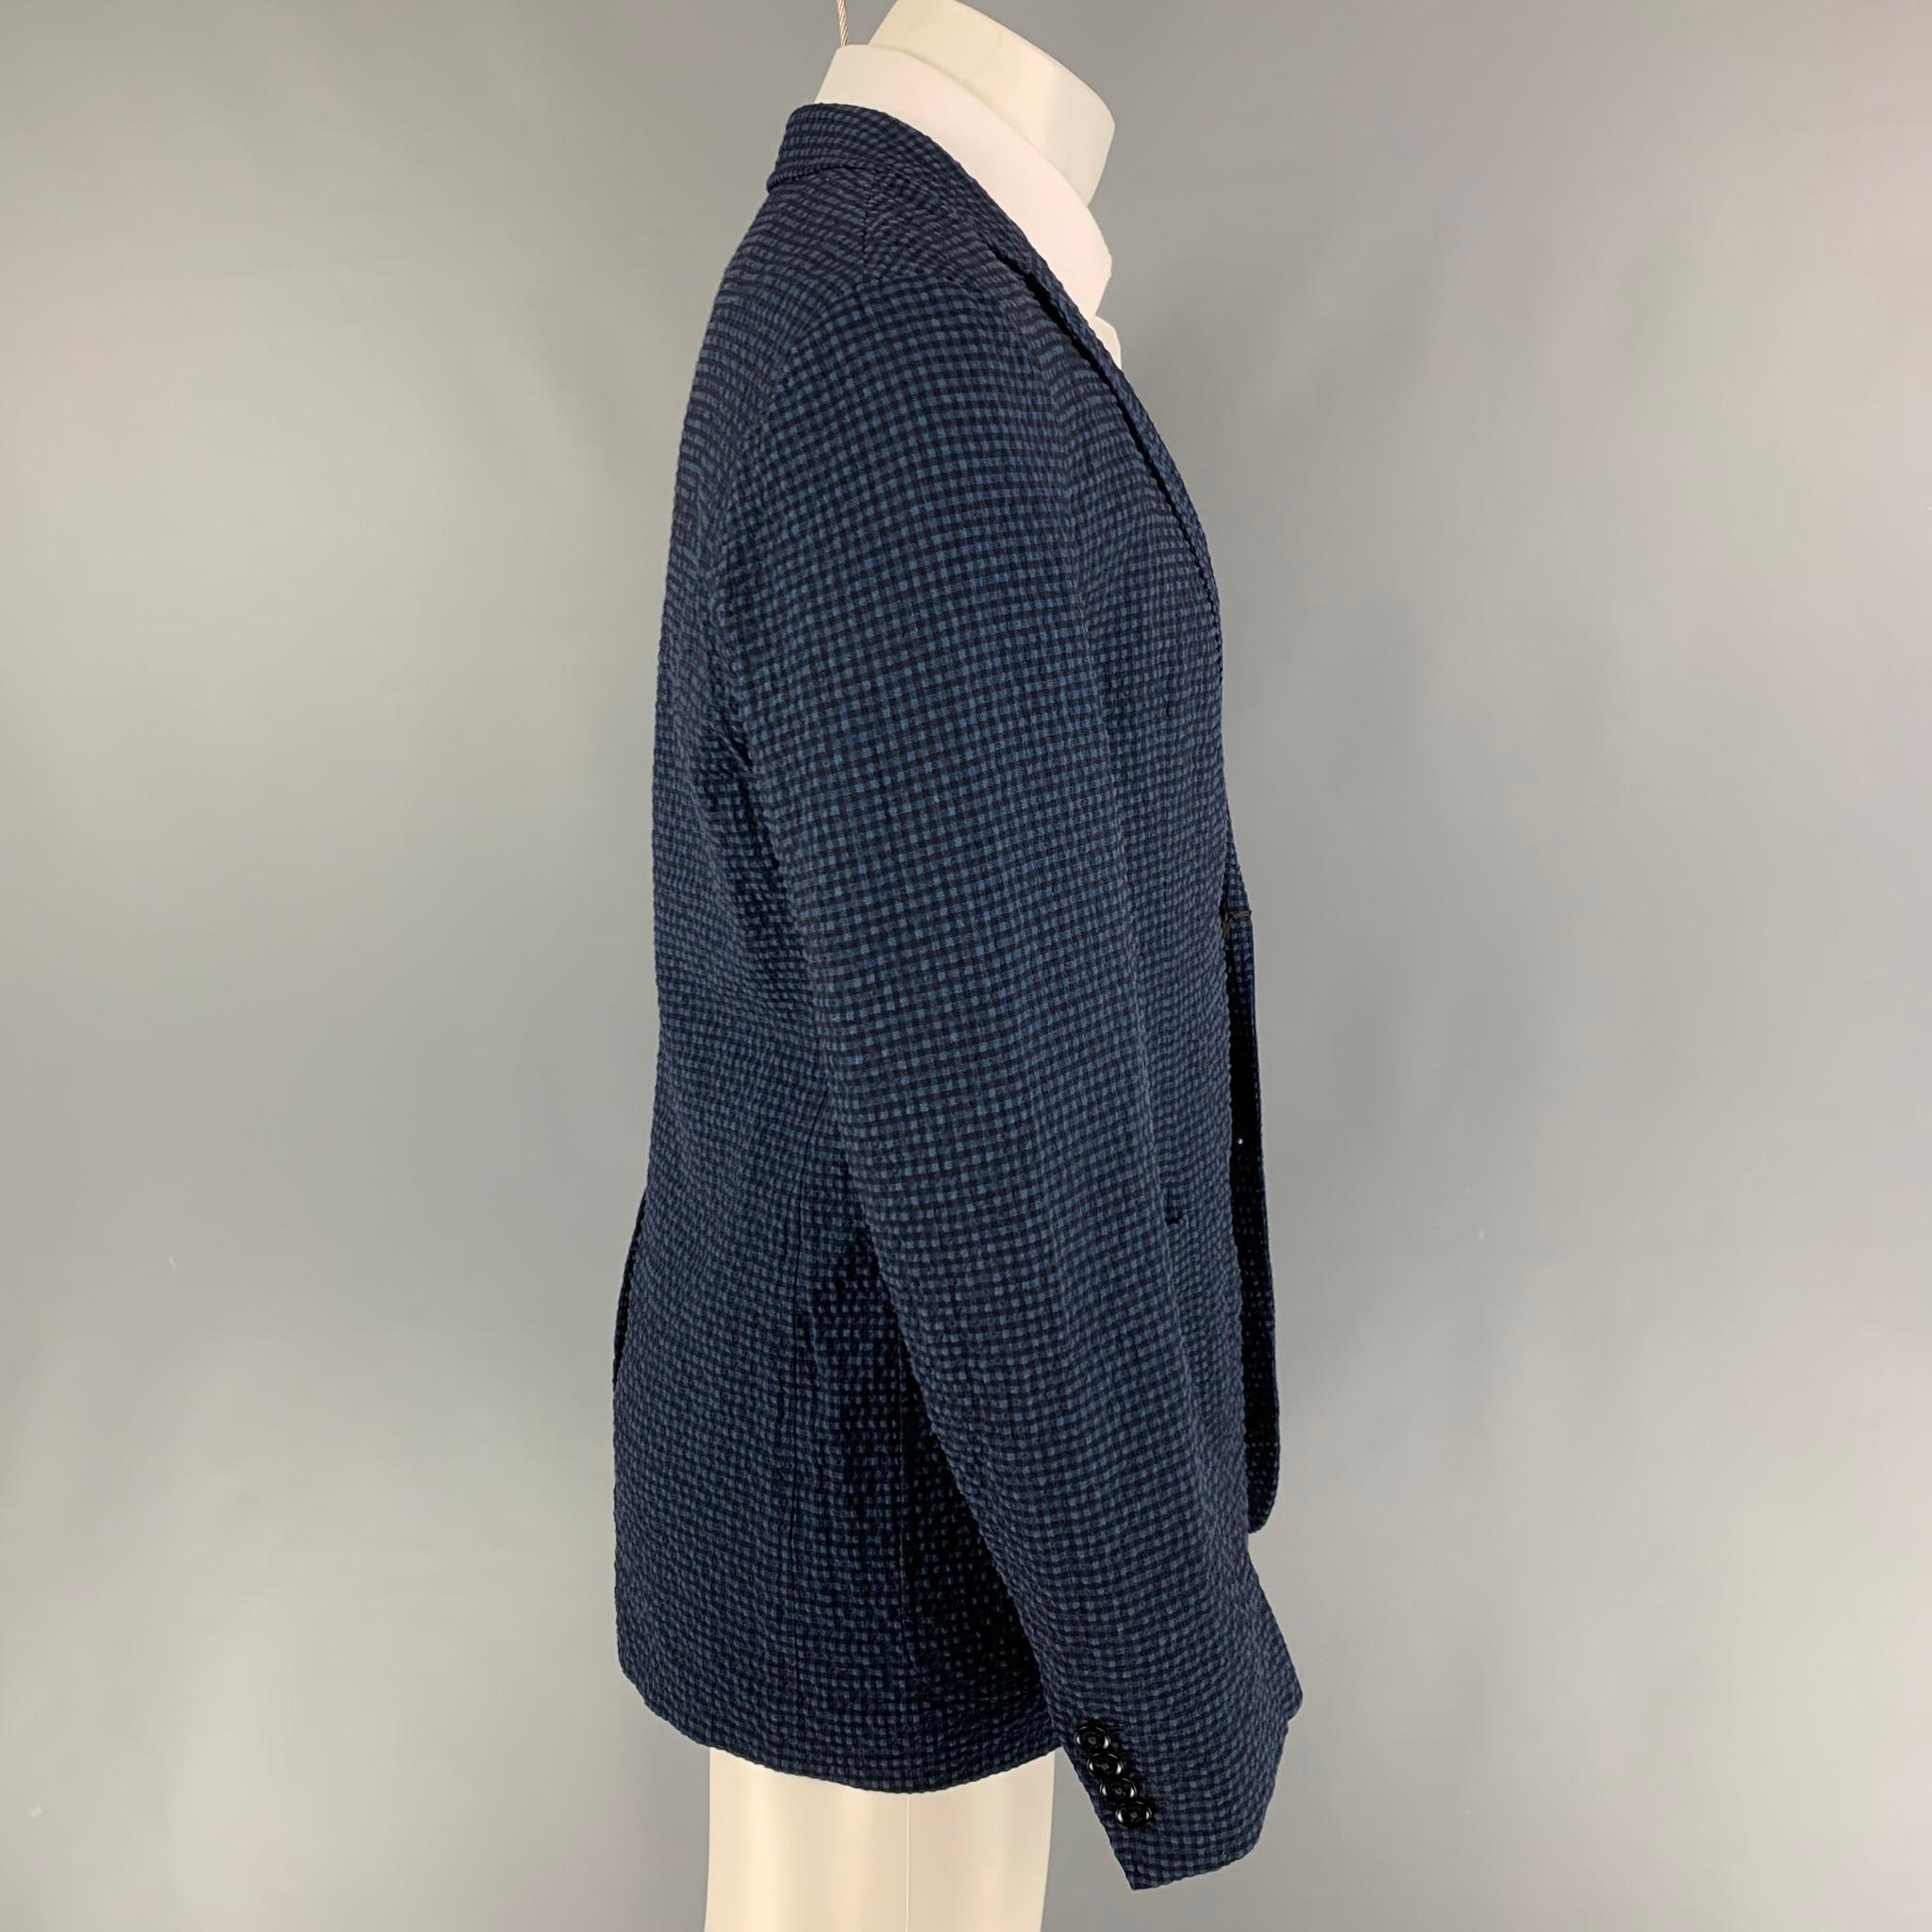 ERMENEGILDO ZEGNA sport coat comes in a blue & black gingham wool blend featuring a notch lapel, patch pockets, single back vent, and a double button closure. 

New With Tags. 
Marked: 50

Measurements:

Shoulder: 18 in.
Chest: 40 in.
Sleeve: 26.5